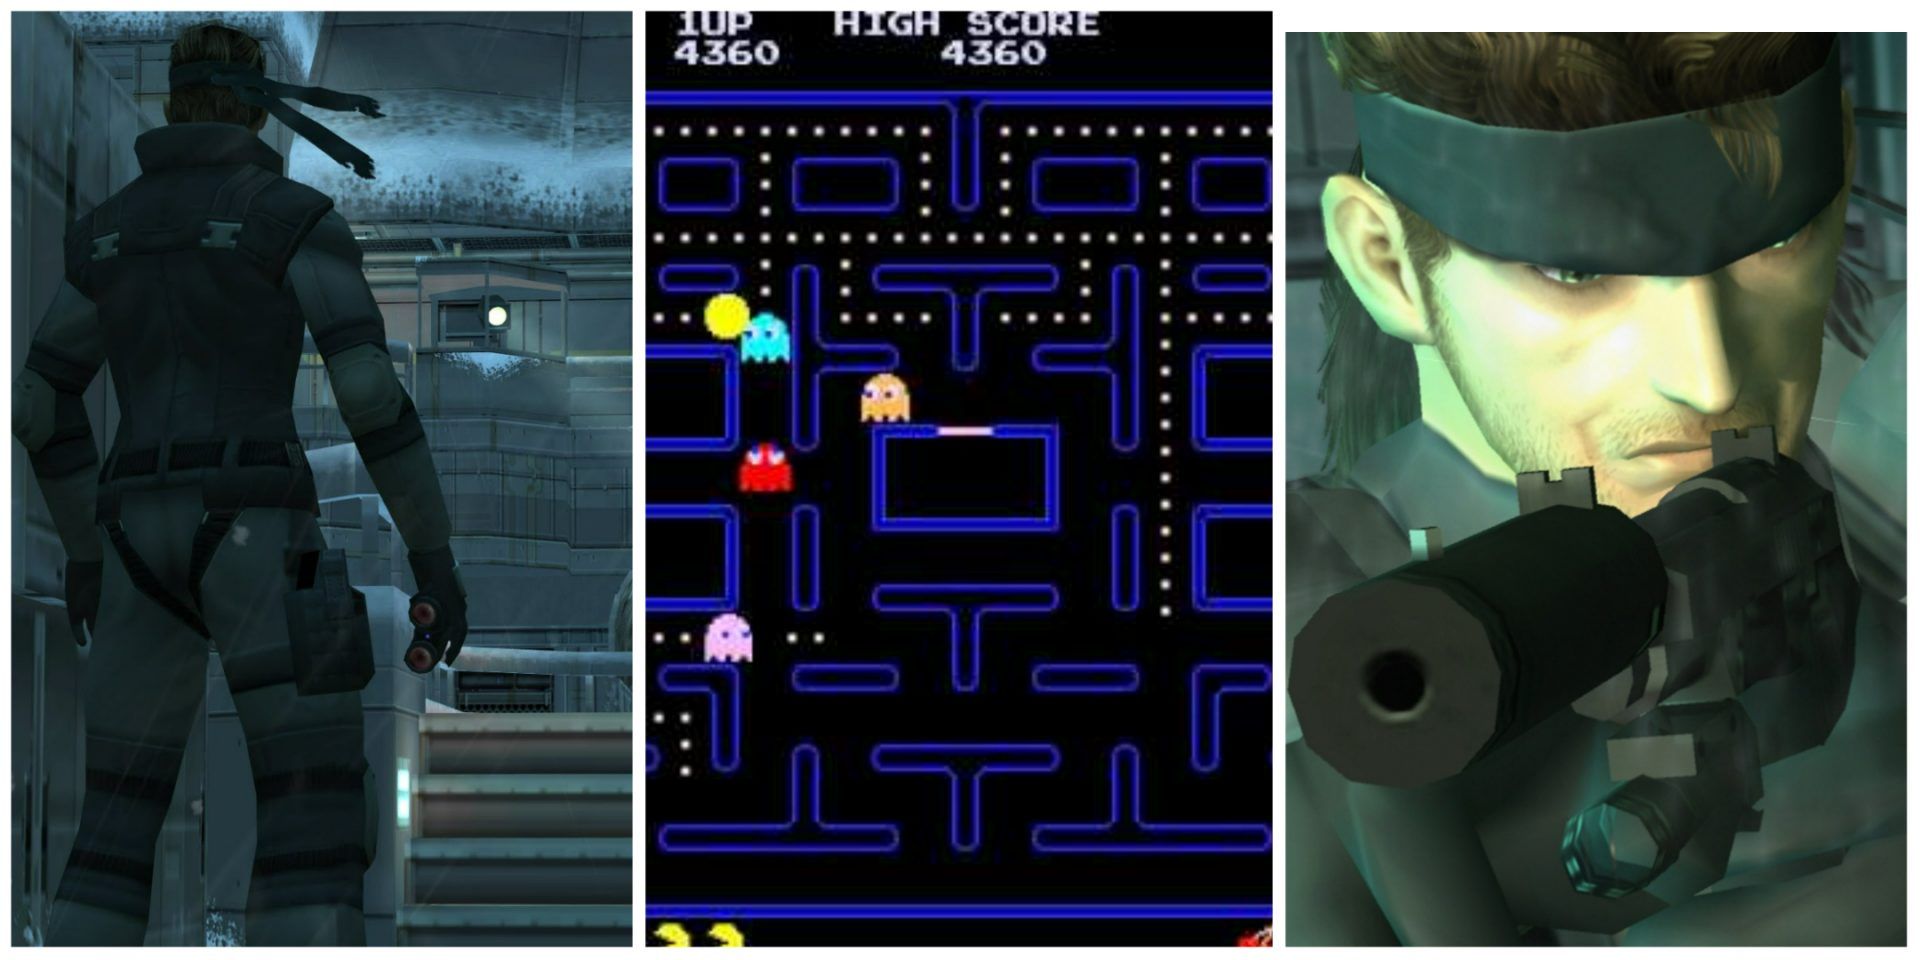 A collage of three images with Solid Snake from the Metal Gear Solid series on the right and left, and a Pac-Man screenshot in the middle.